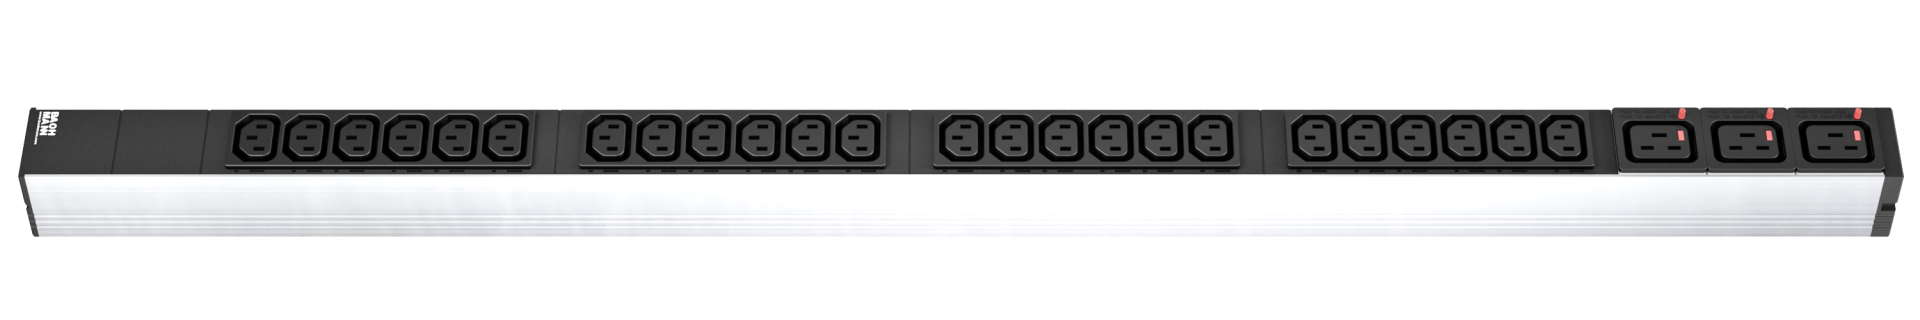 PDU Vertical 24xC13 6xCEE7/3 400V 16A ,Supply cable 3m H05VV-F 5G 2,5mm²